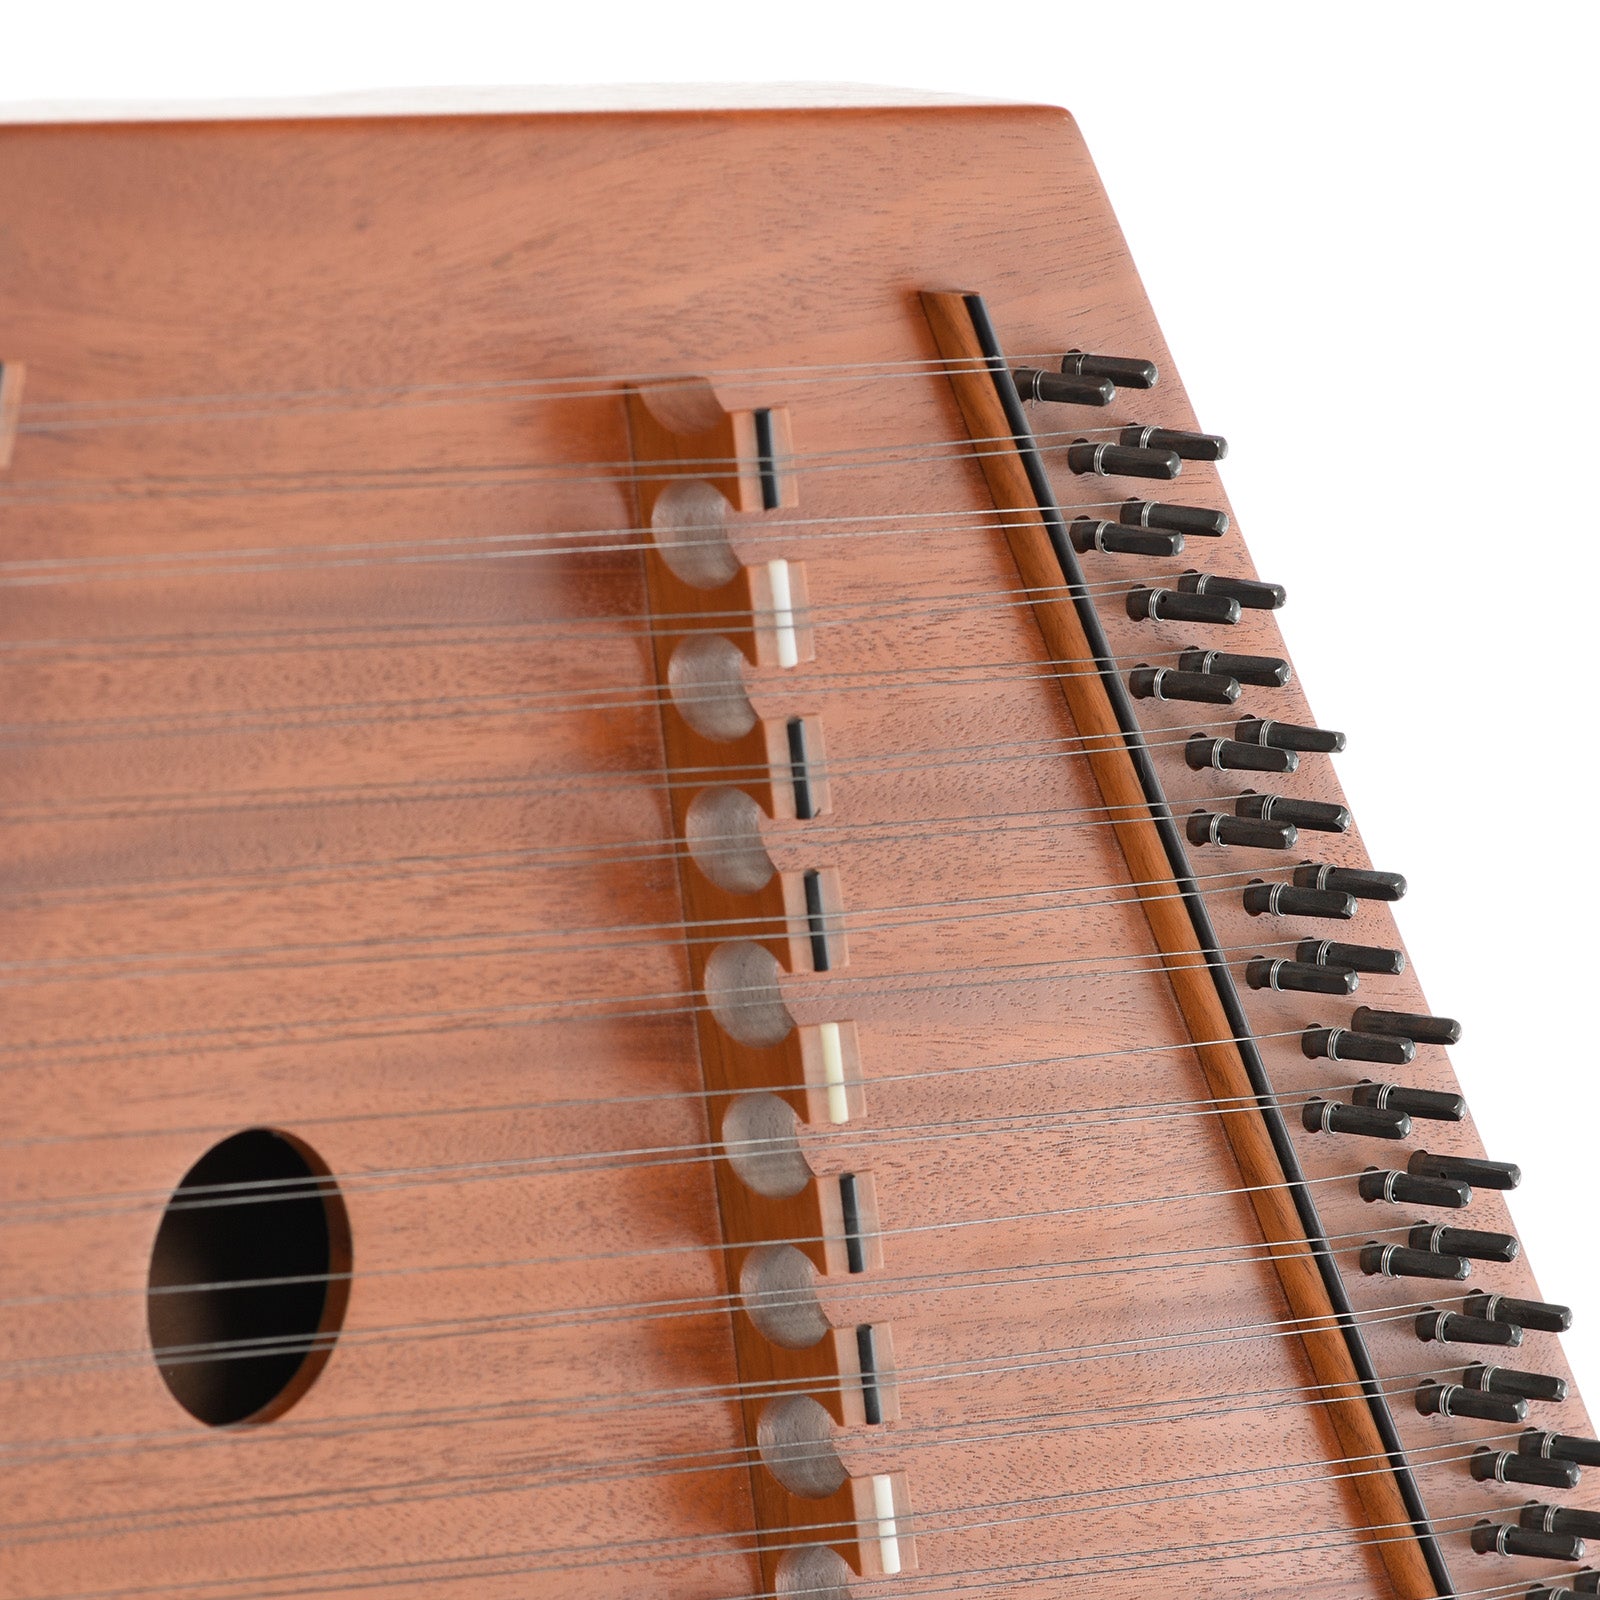 Tuning pegs of Dusty Strings D-10 Hammered Dulcimer (1992)